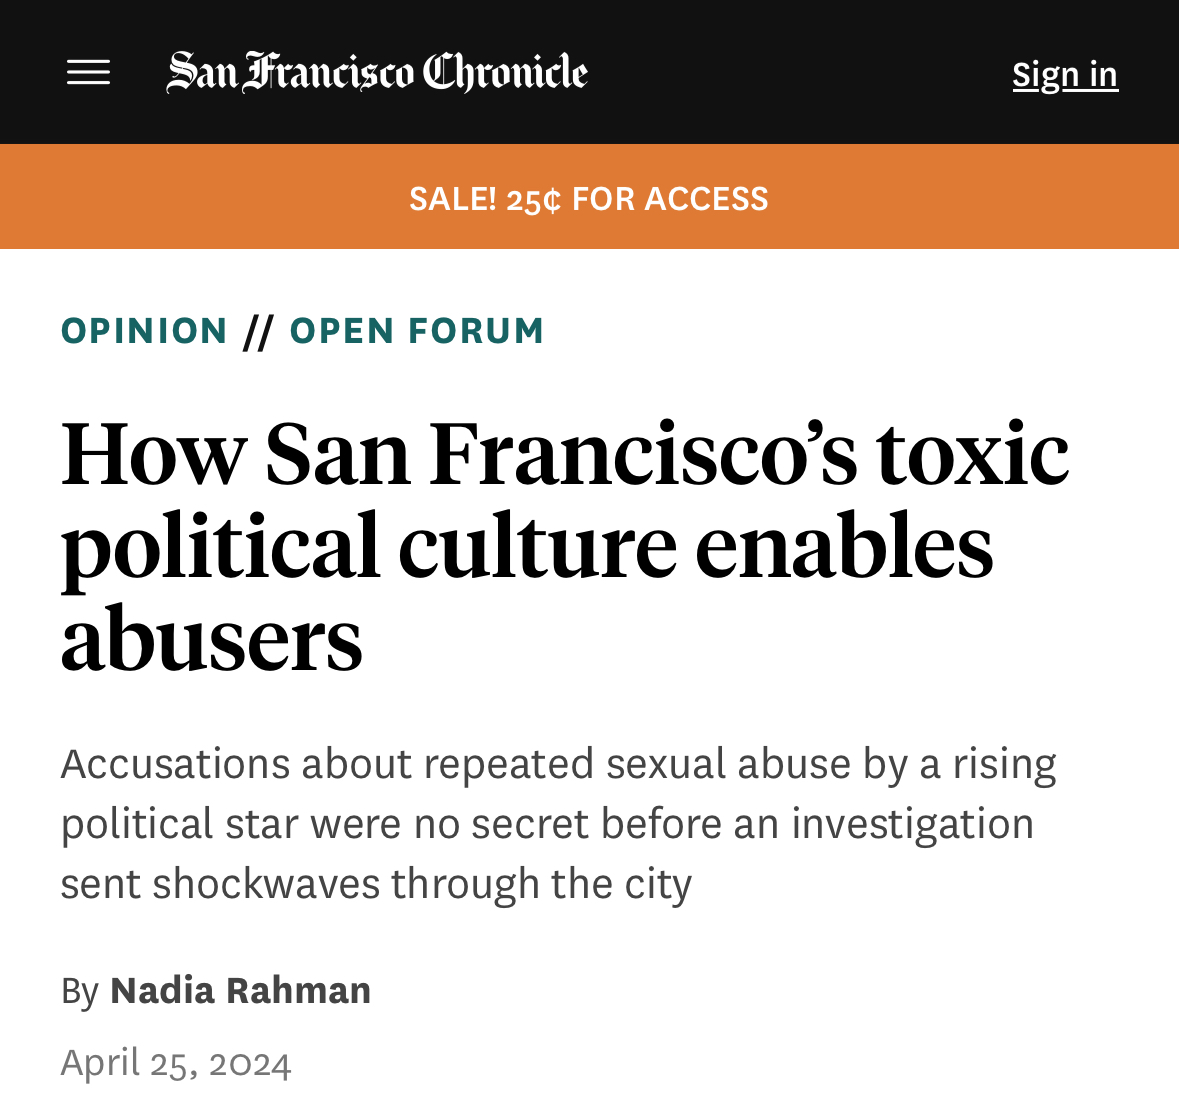 As an organizer in SF politics, I've seen 1st hand how the city's toxic political culture enables abusers + people w/influence look away from the behavior of their problematic friends & allies. It's time to start calling people out for bad behavior 🧵 sfchronicle.com/opinion/openfo…